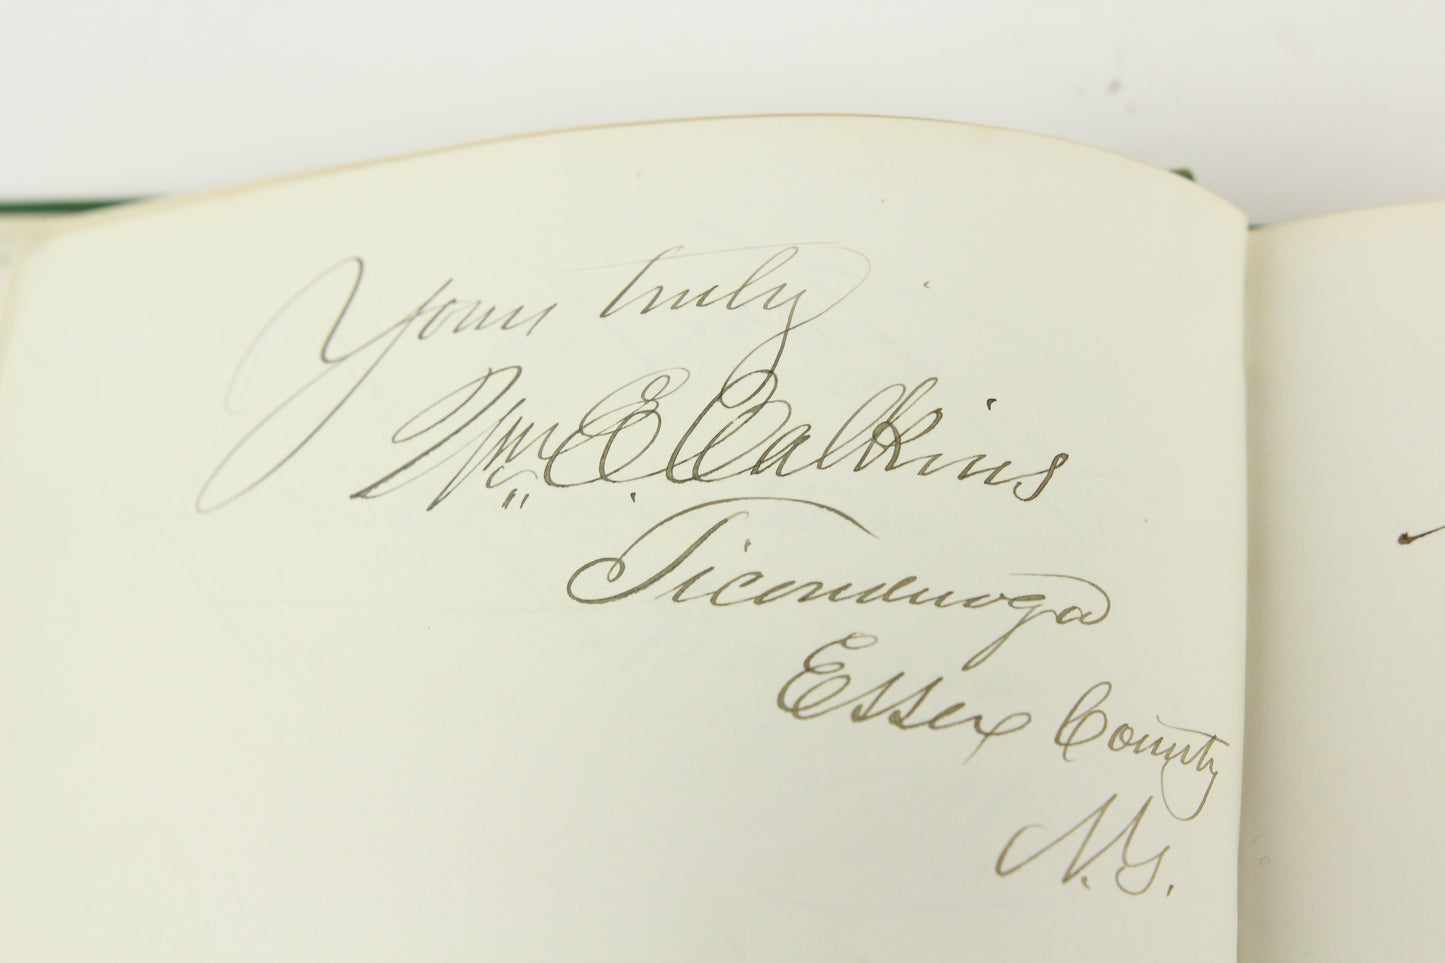 99th New York State Assembly Autograph Book, Belonging to J.E.B. Santee, 1876